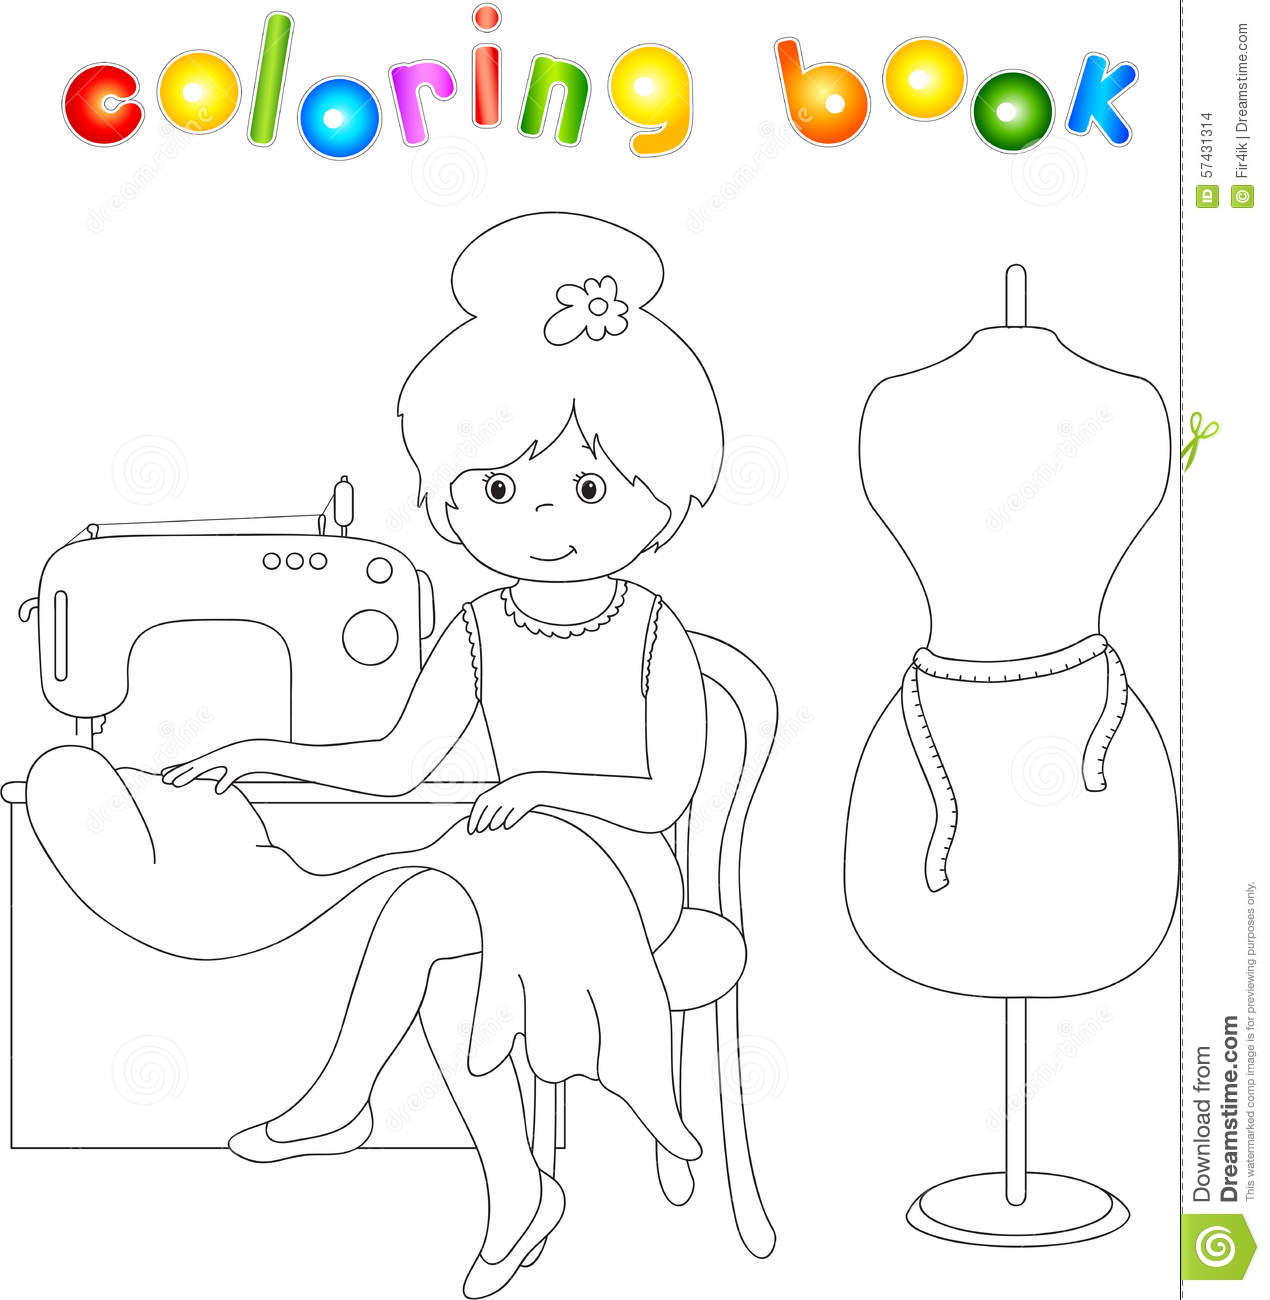 Sewing Machine coloring #4, Download drawings